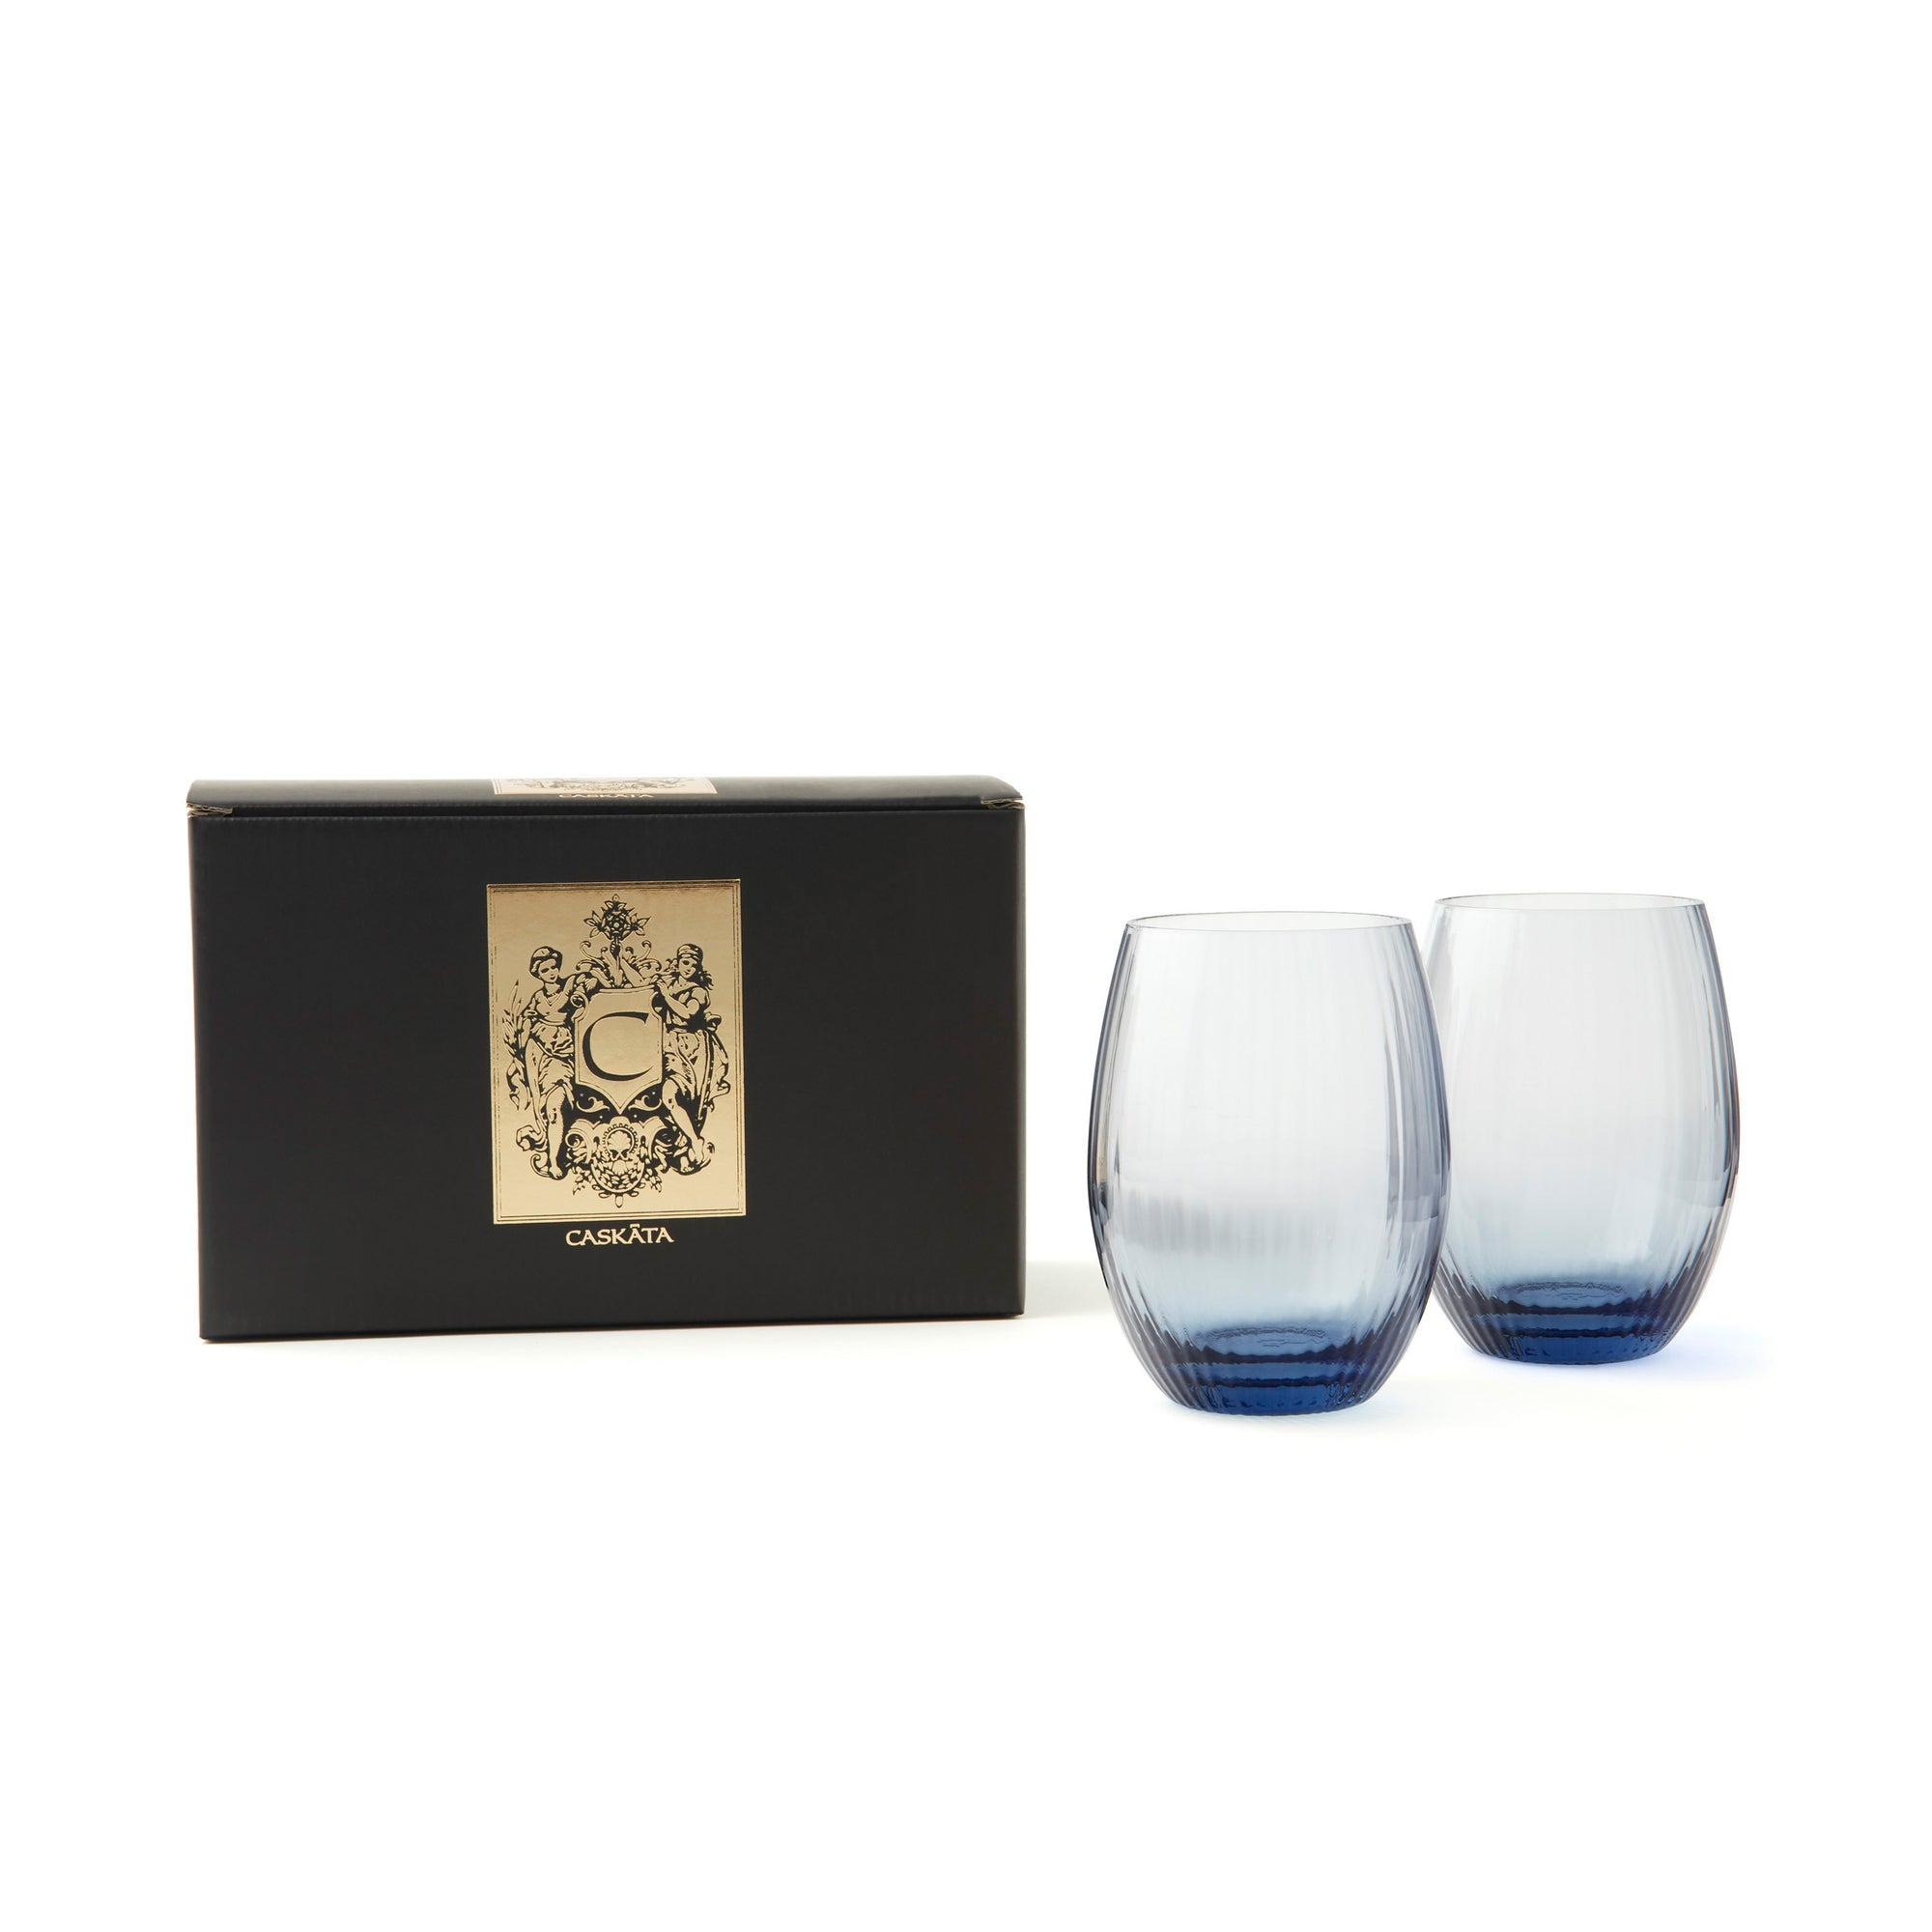 Quinn Tumblers or Stemless Wine Glasses in Ocean Blue, Mouth Blown Crystal from Caskata Set of 2